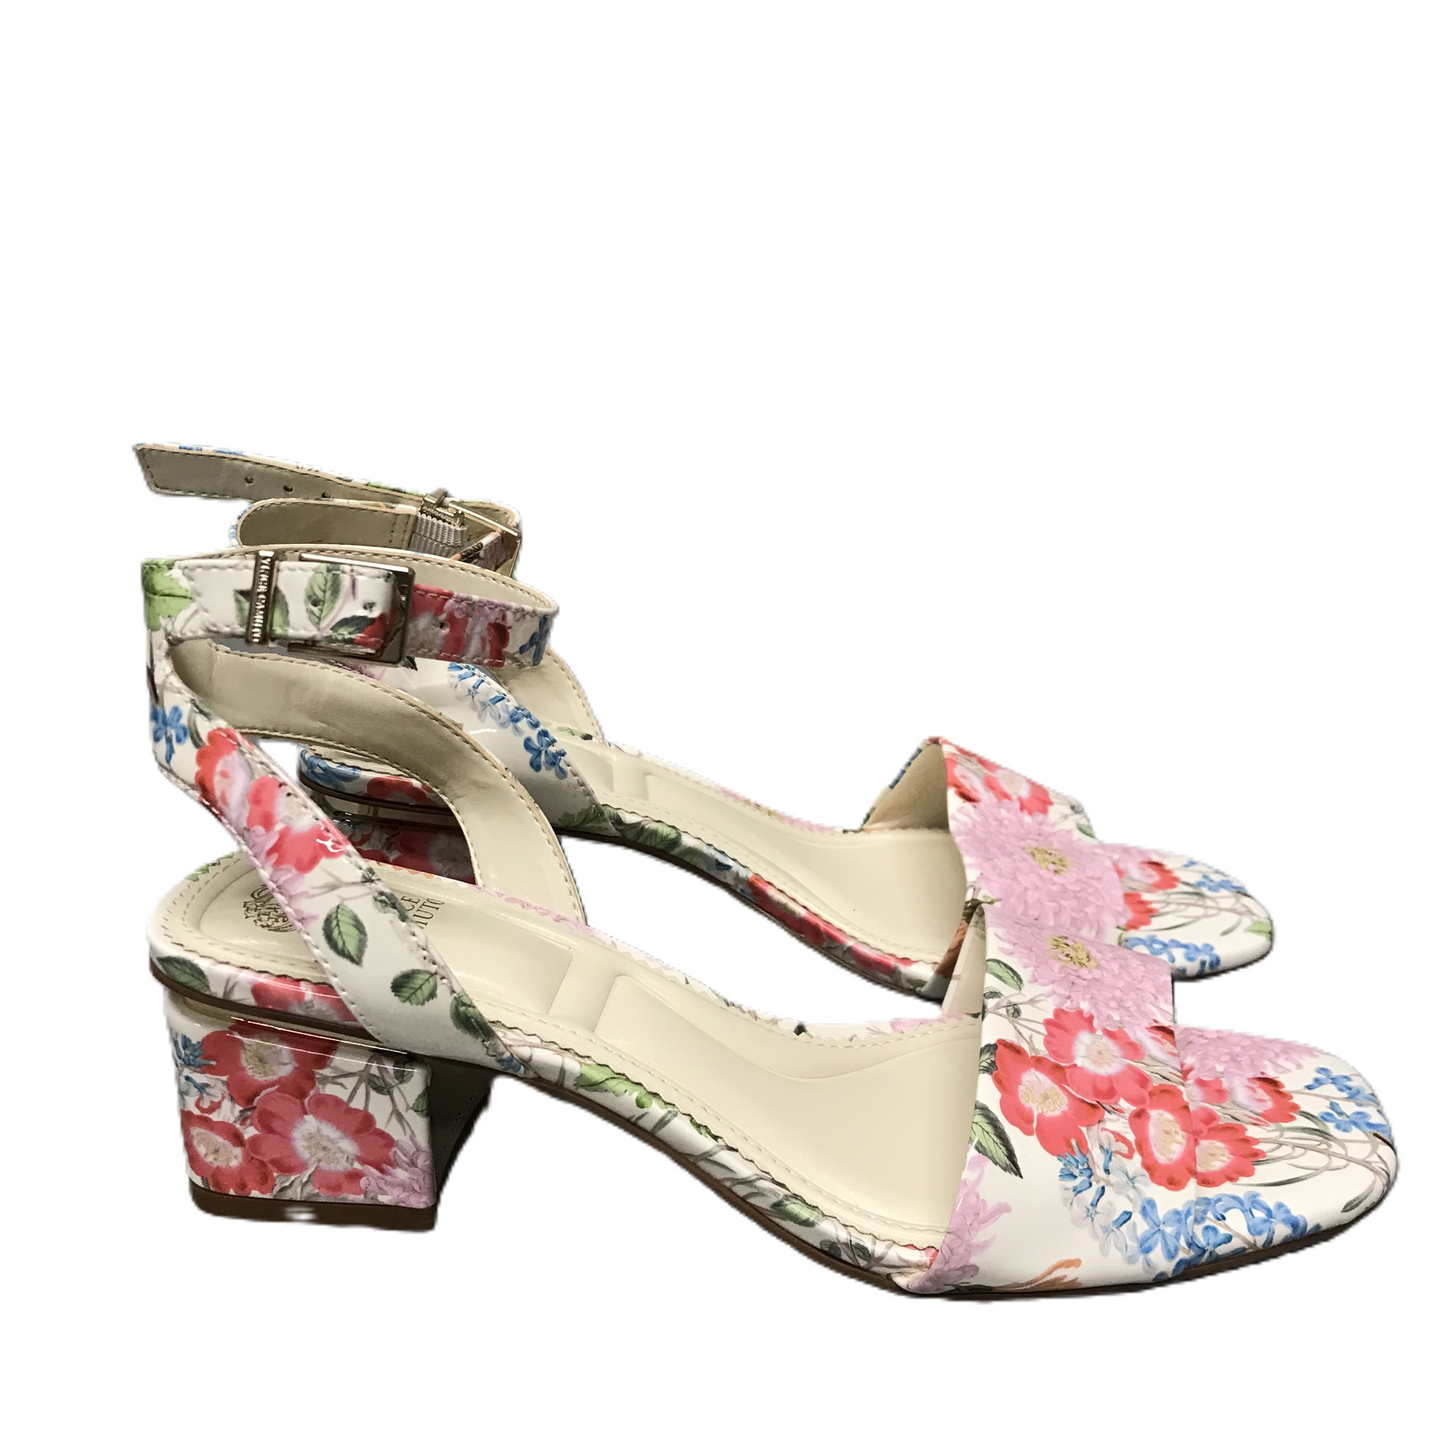 Floral Print Shoes Heels Block By Vince Camuto, Size: 8.5